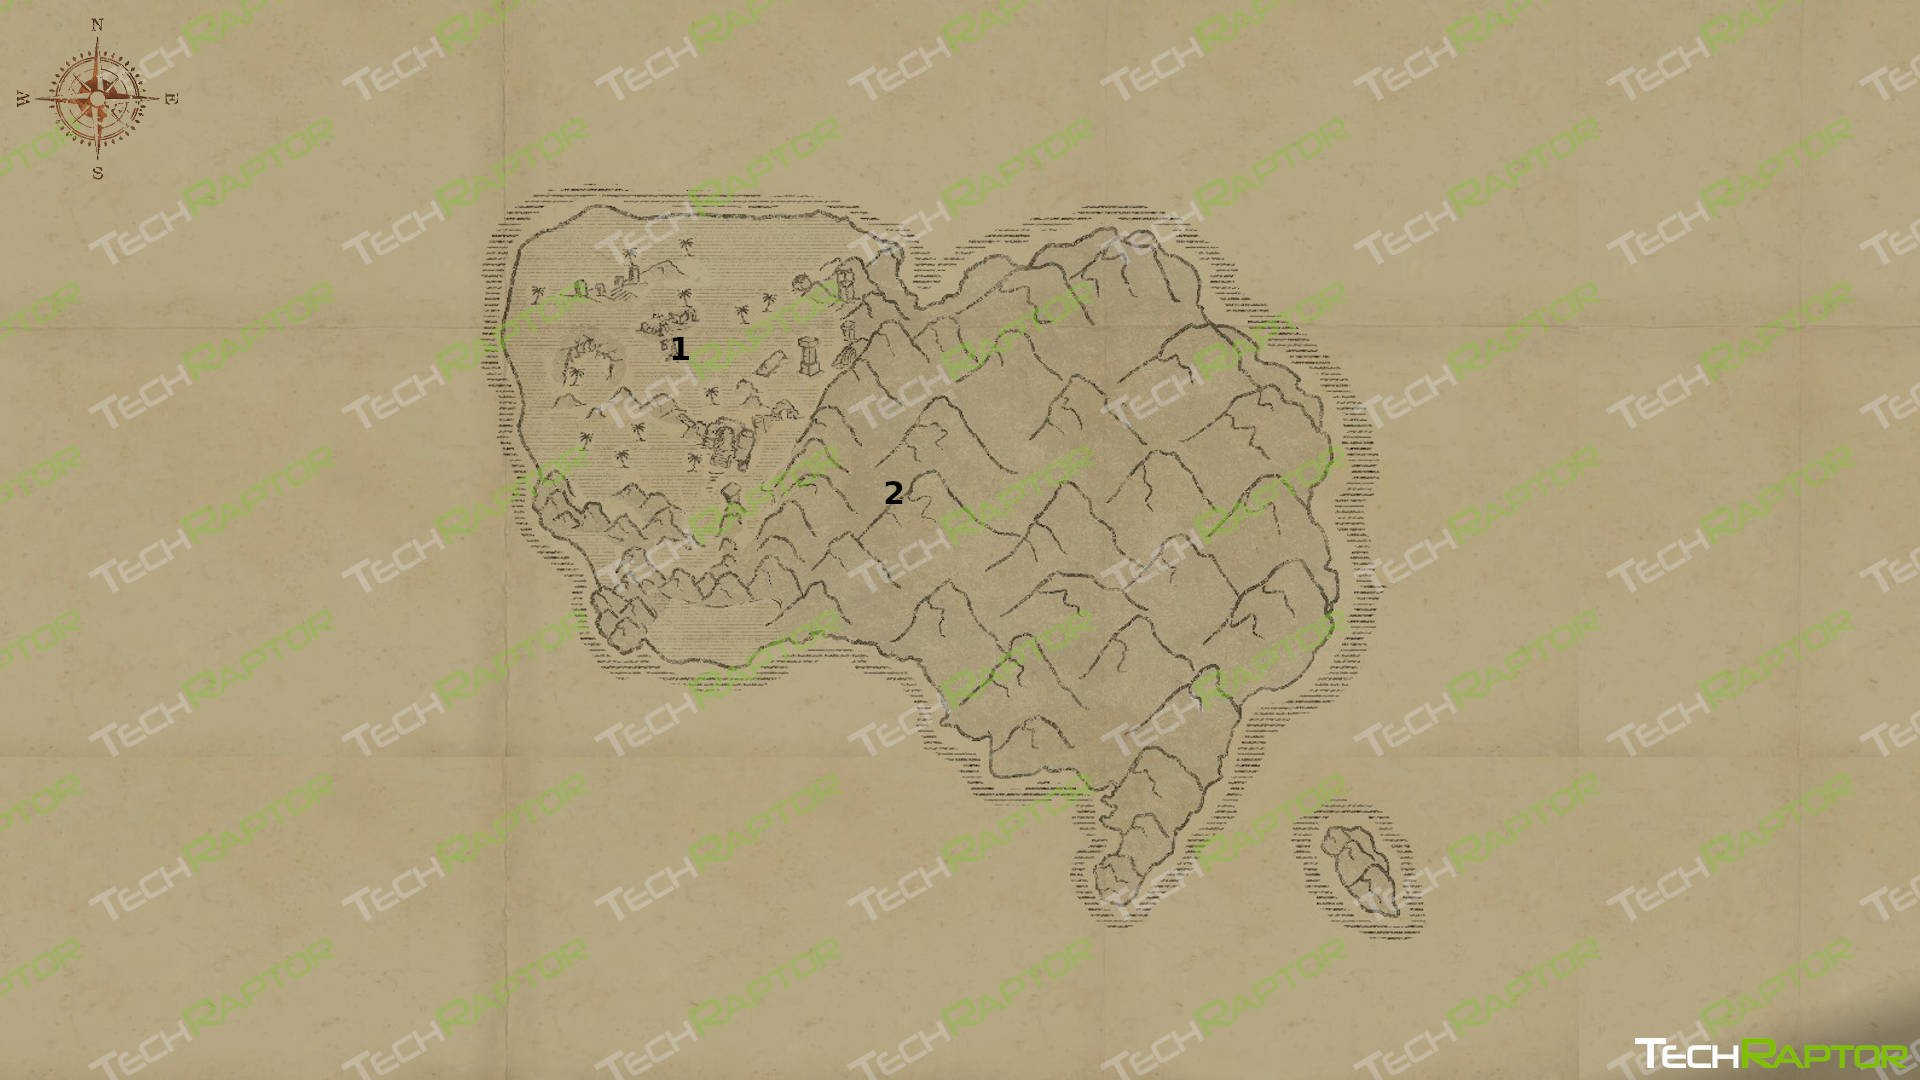 Survival: Fountain of Youth Book Locations Map Guide - Windy Island Map